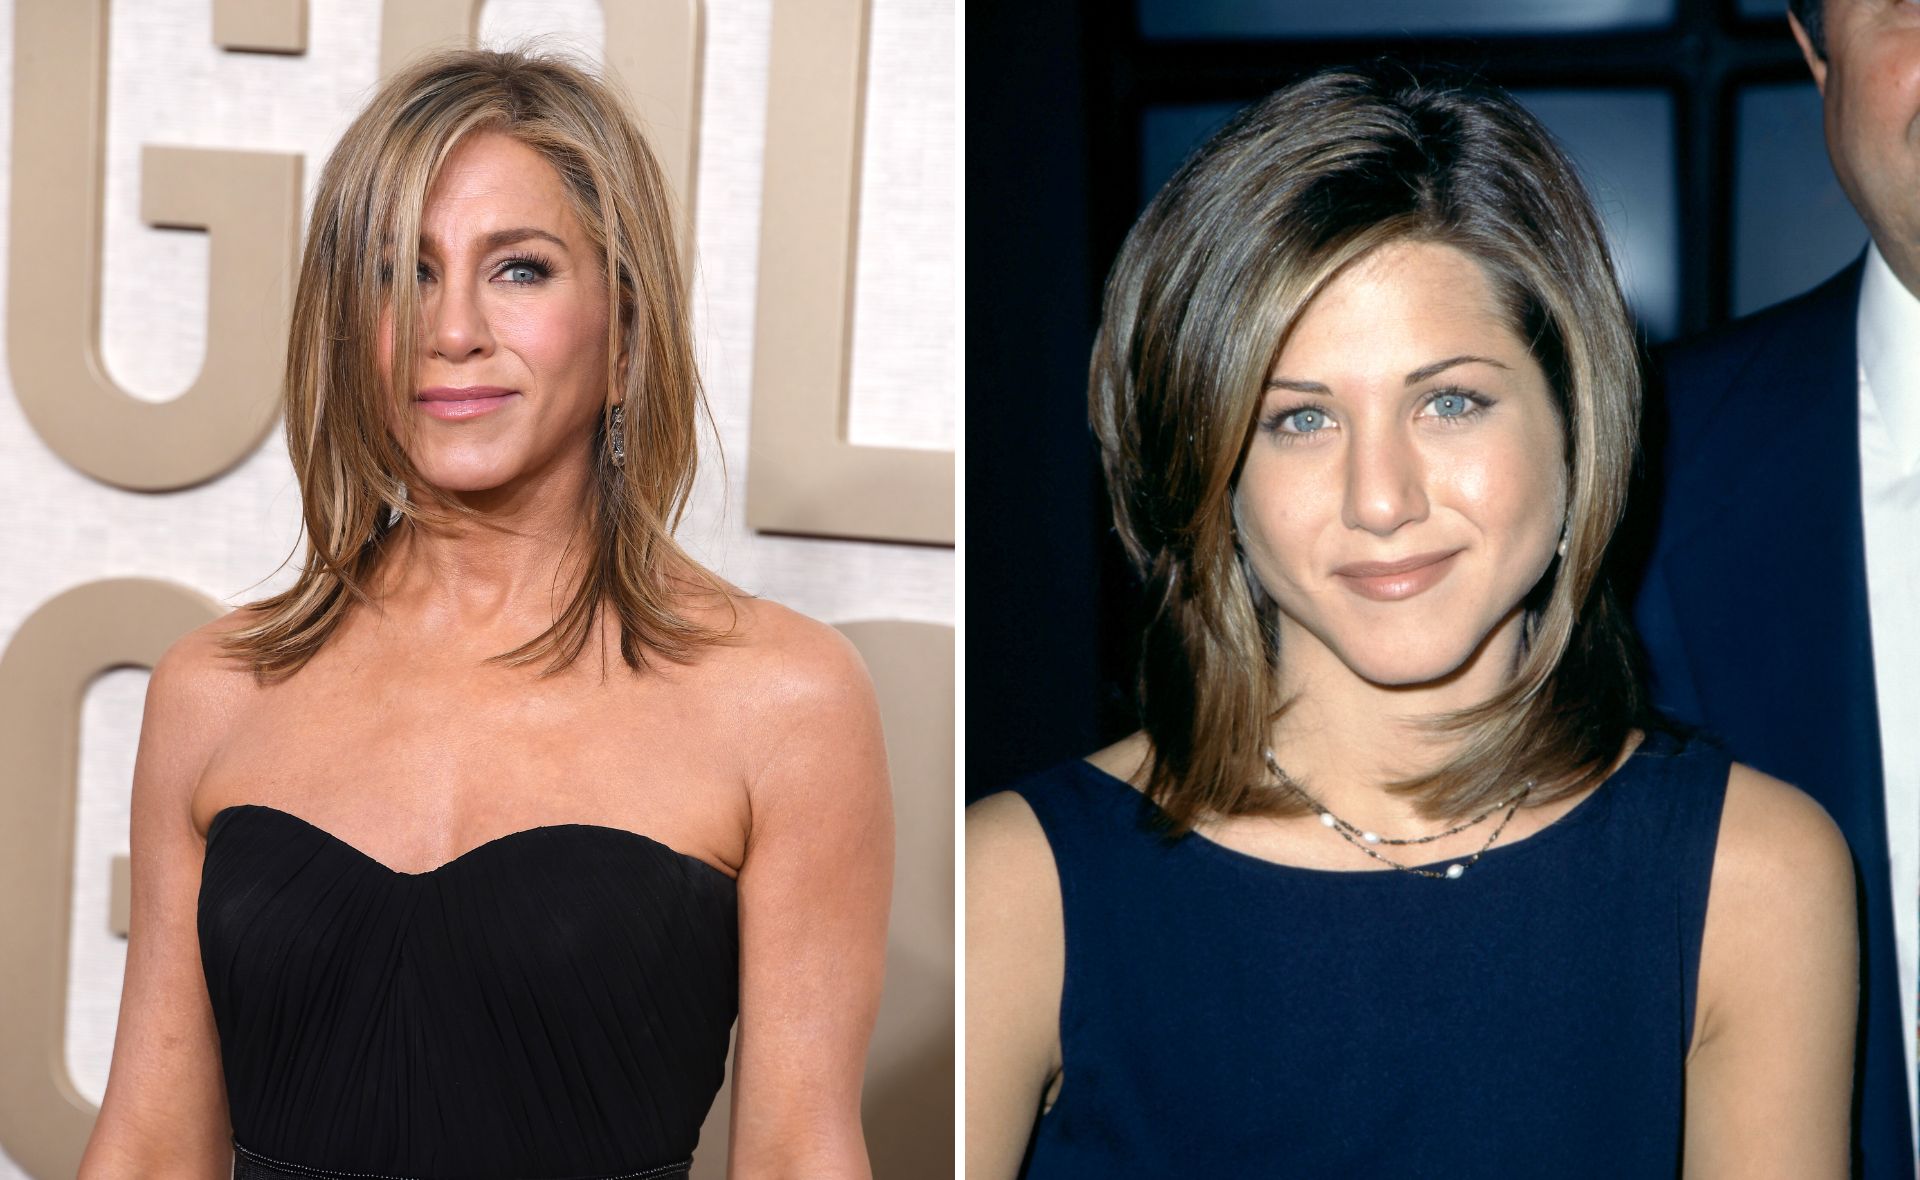 Jennifer Aniston channels Rachel Green with her new hairstyle